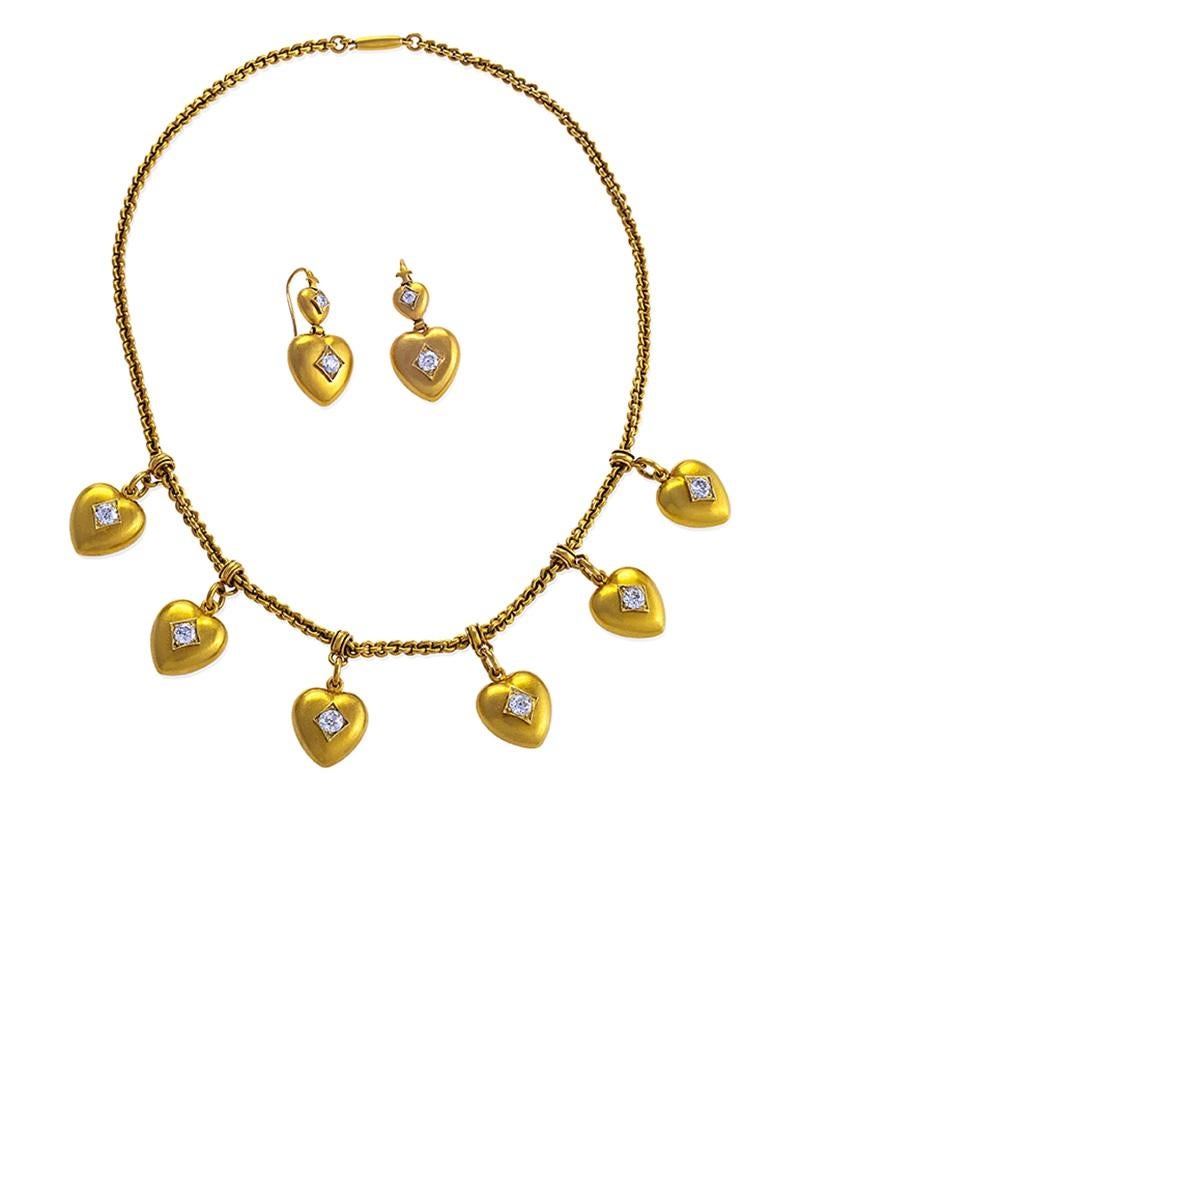 A charming 18 karat gold chain featuring six heart-shaped, diamond-studded dangling charms with a matching pair of two-tiered diamond and gold heart shaped earrings. Each heart in this traditionally sentimental late Victorian suite is studded with